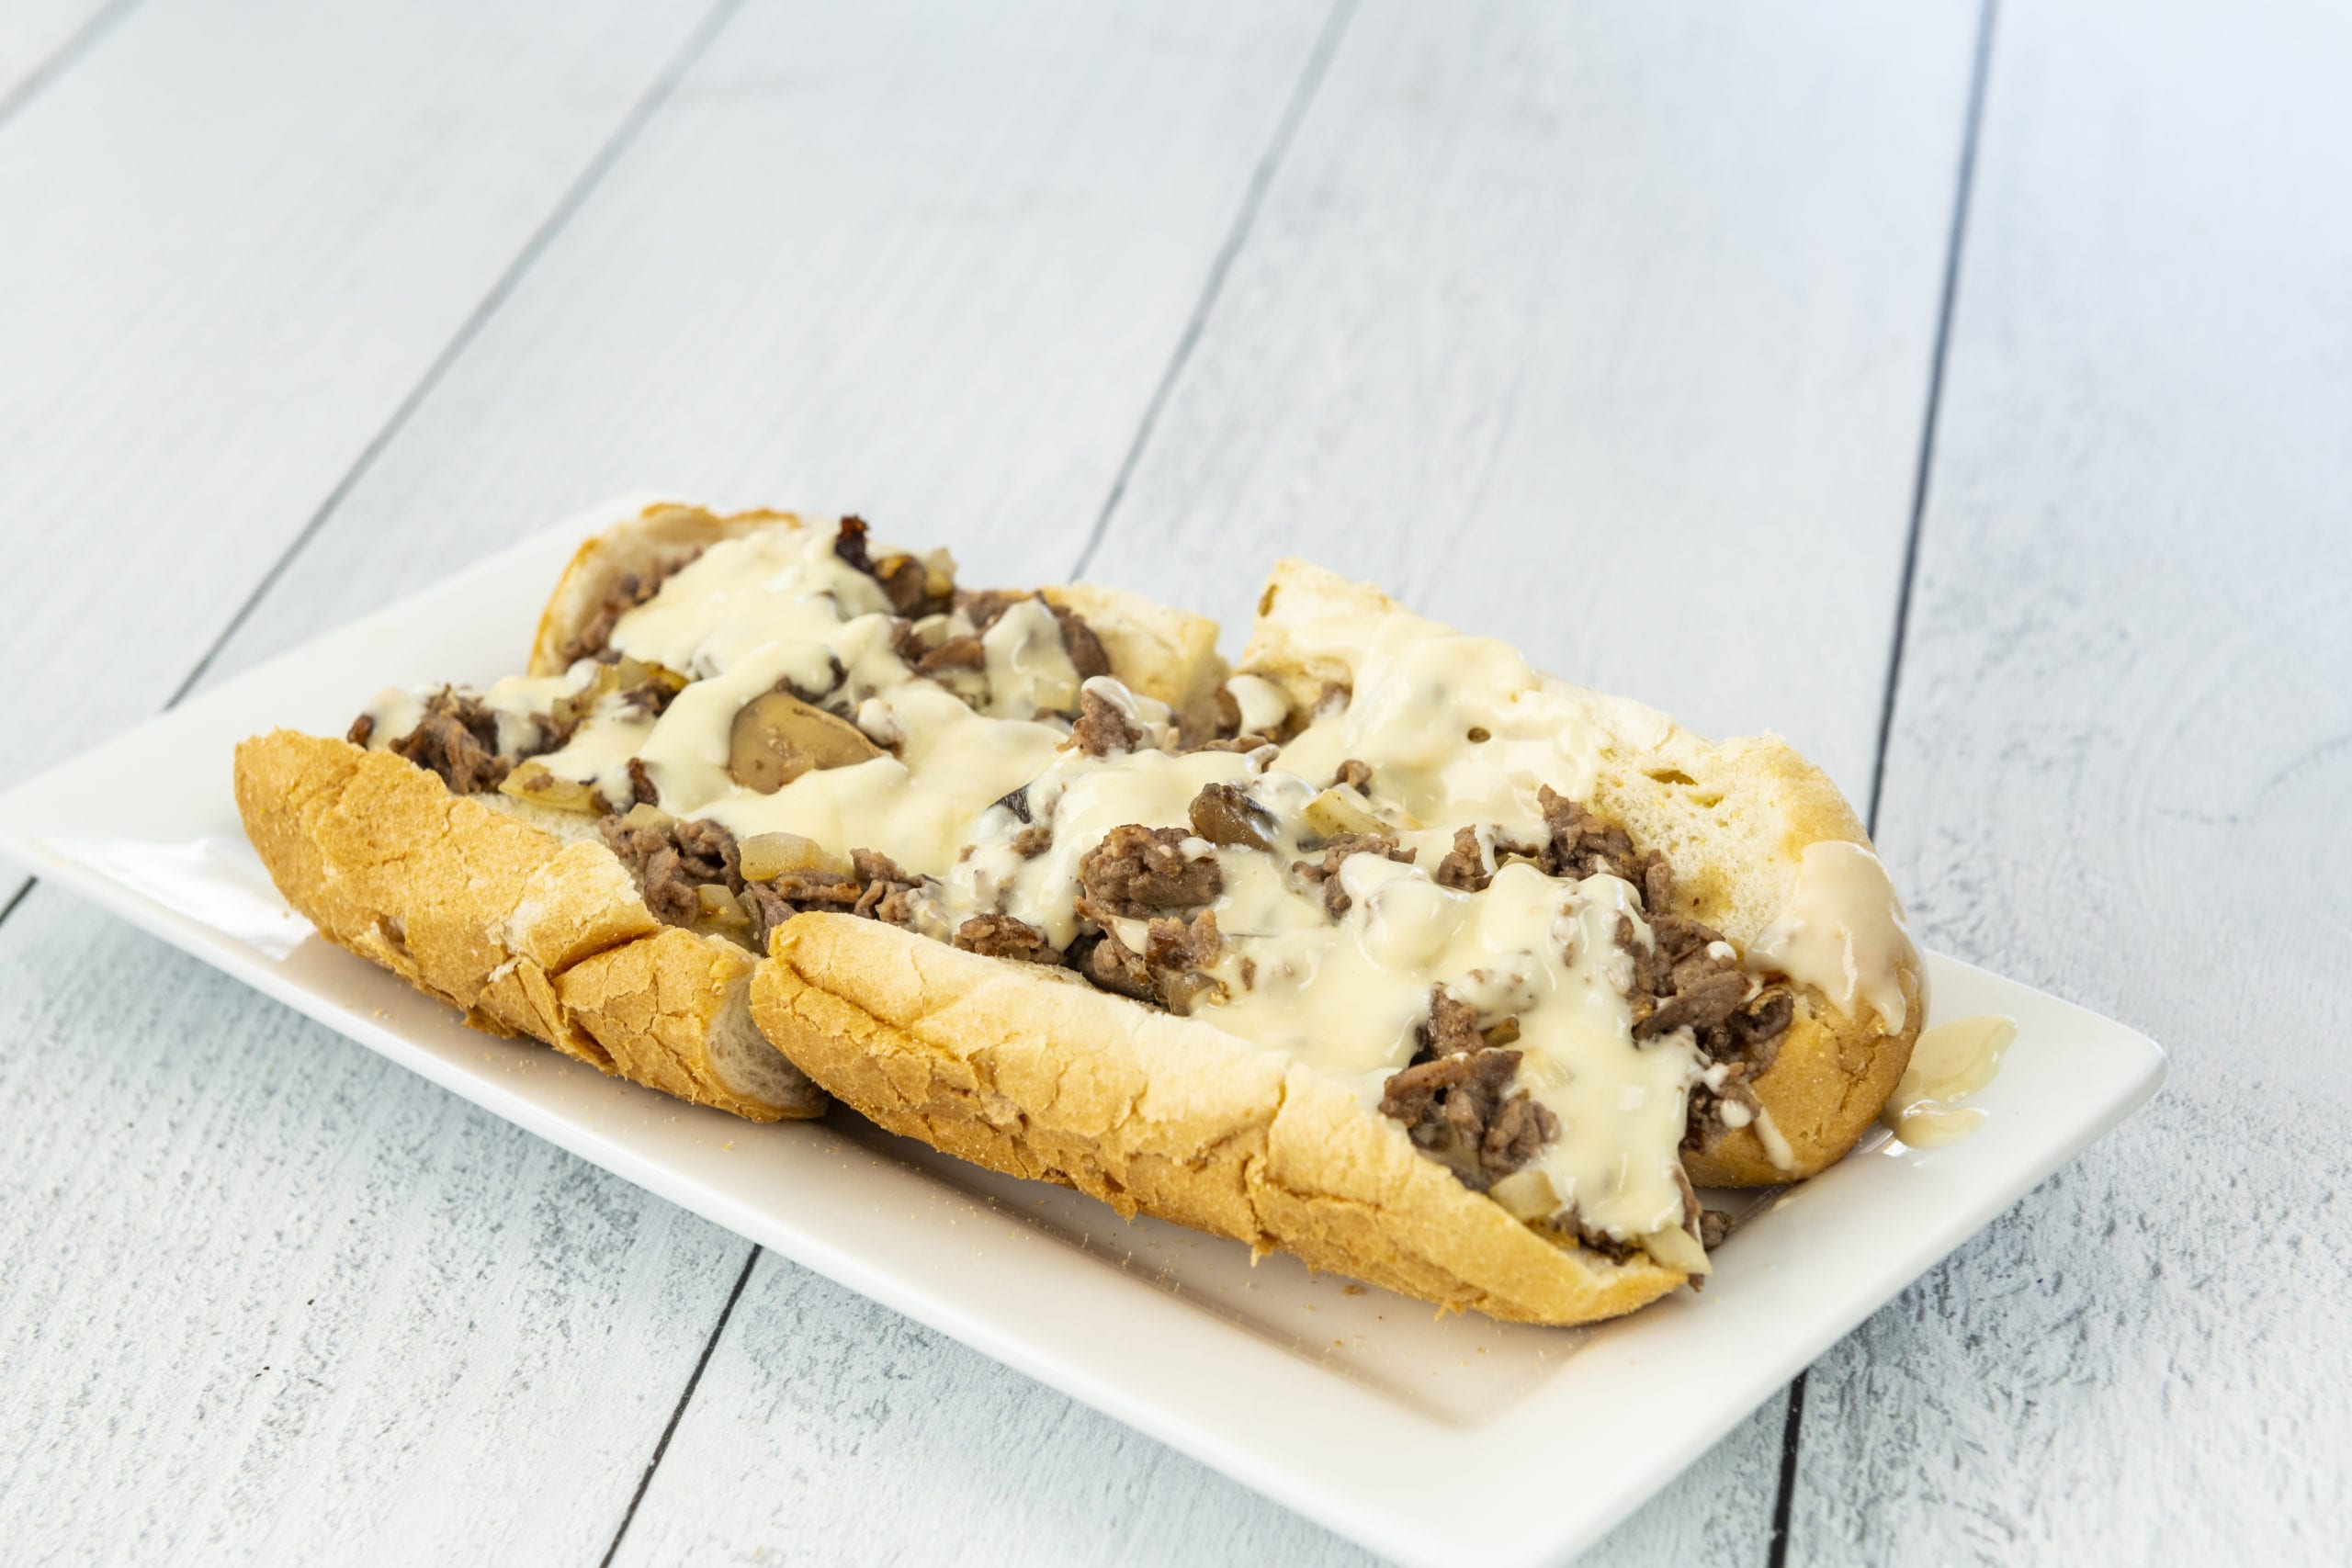 Philly Cheesesteak | CD Anchor Key West